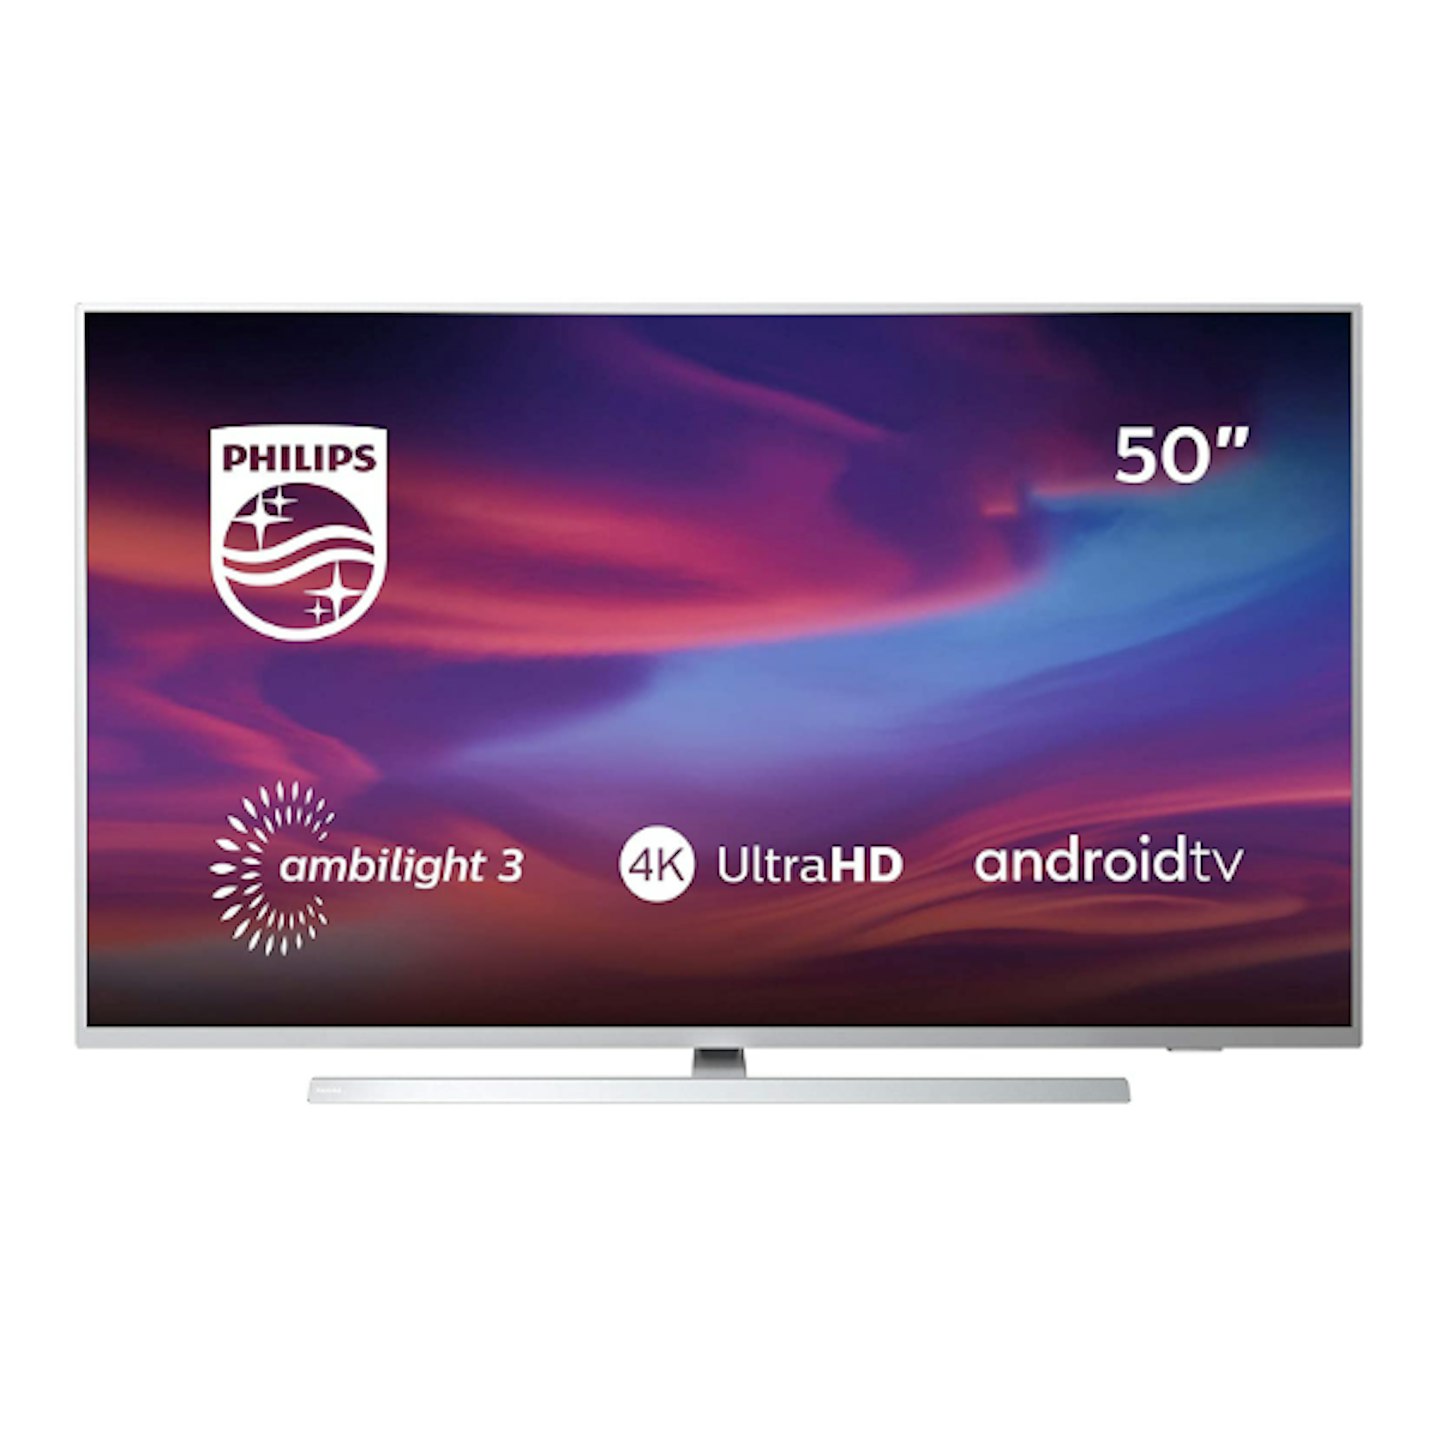 Philips 50PUS7304/12 50-Inch 4K UHD Android Smart TV with Ambilight